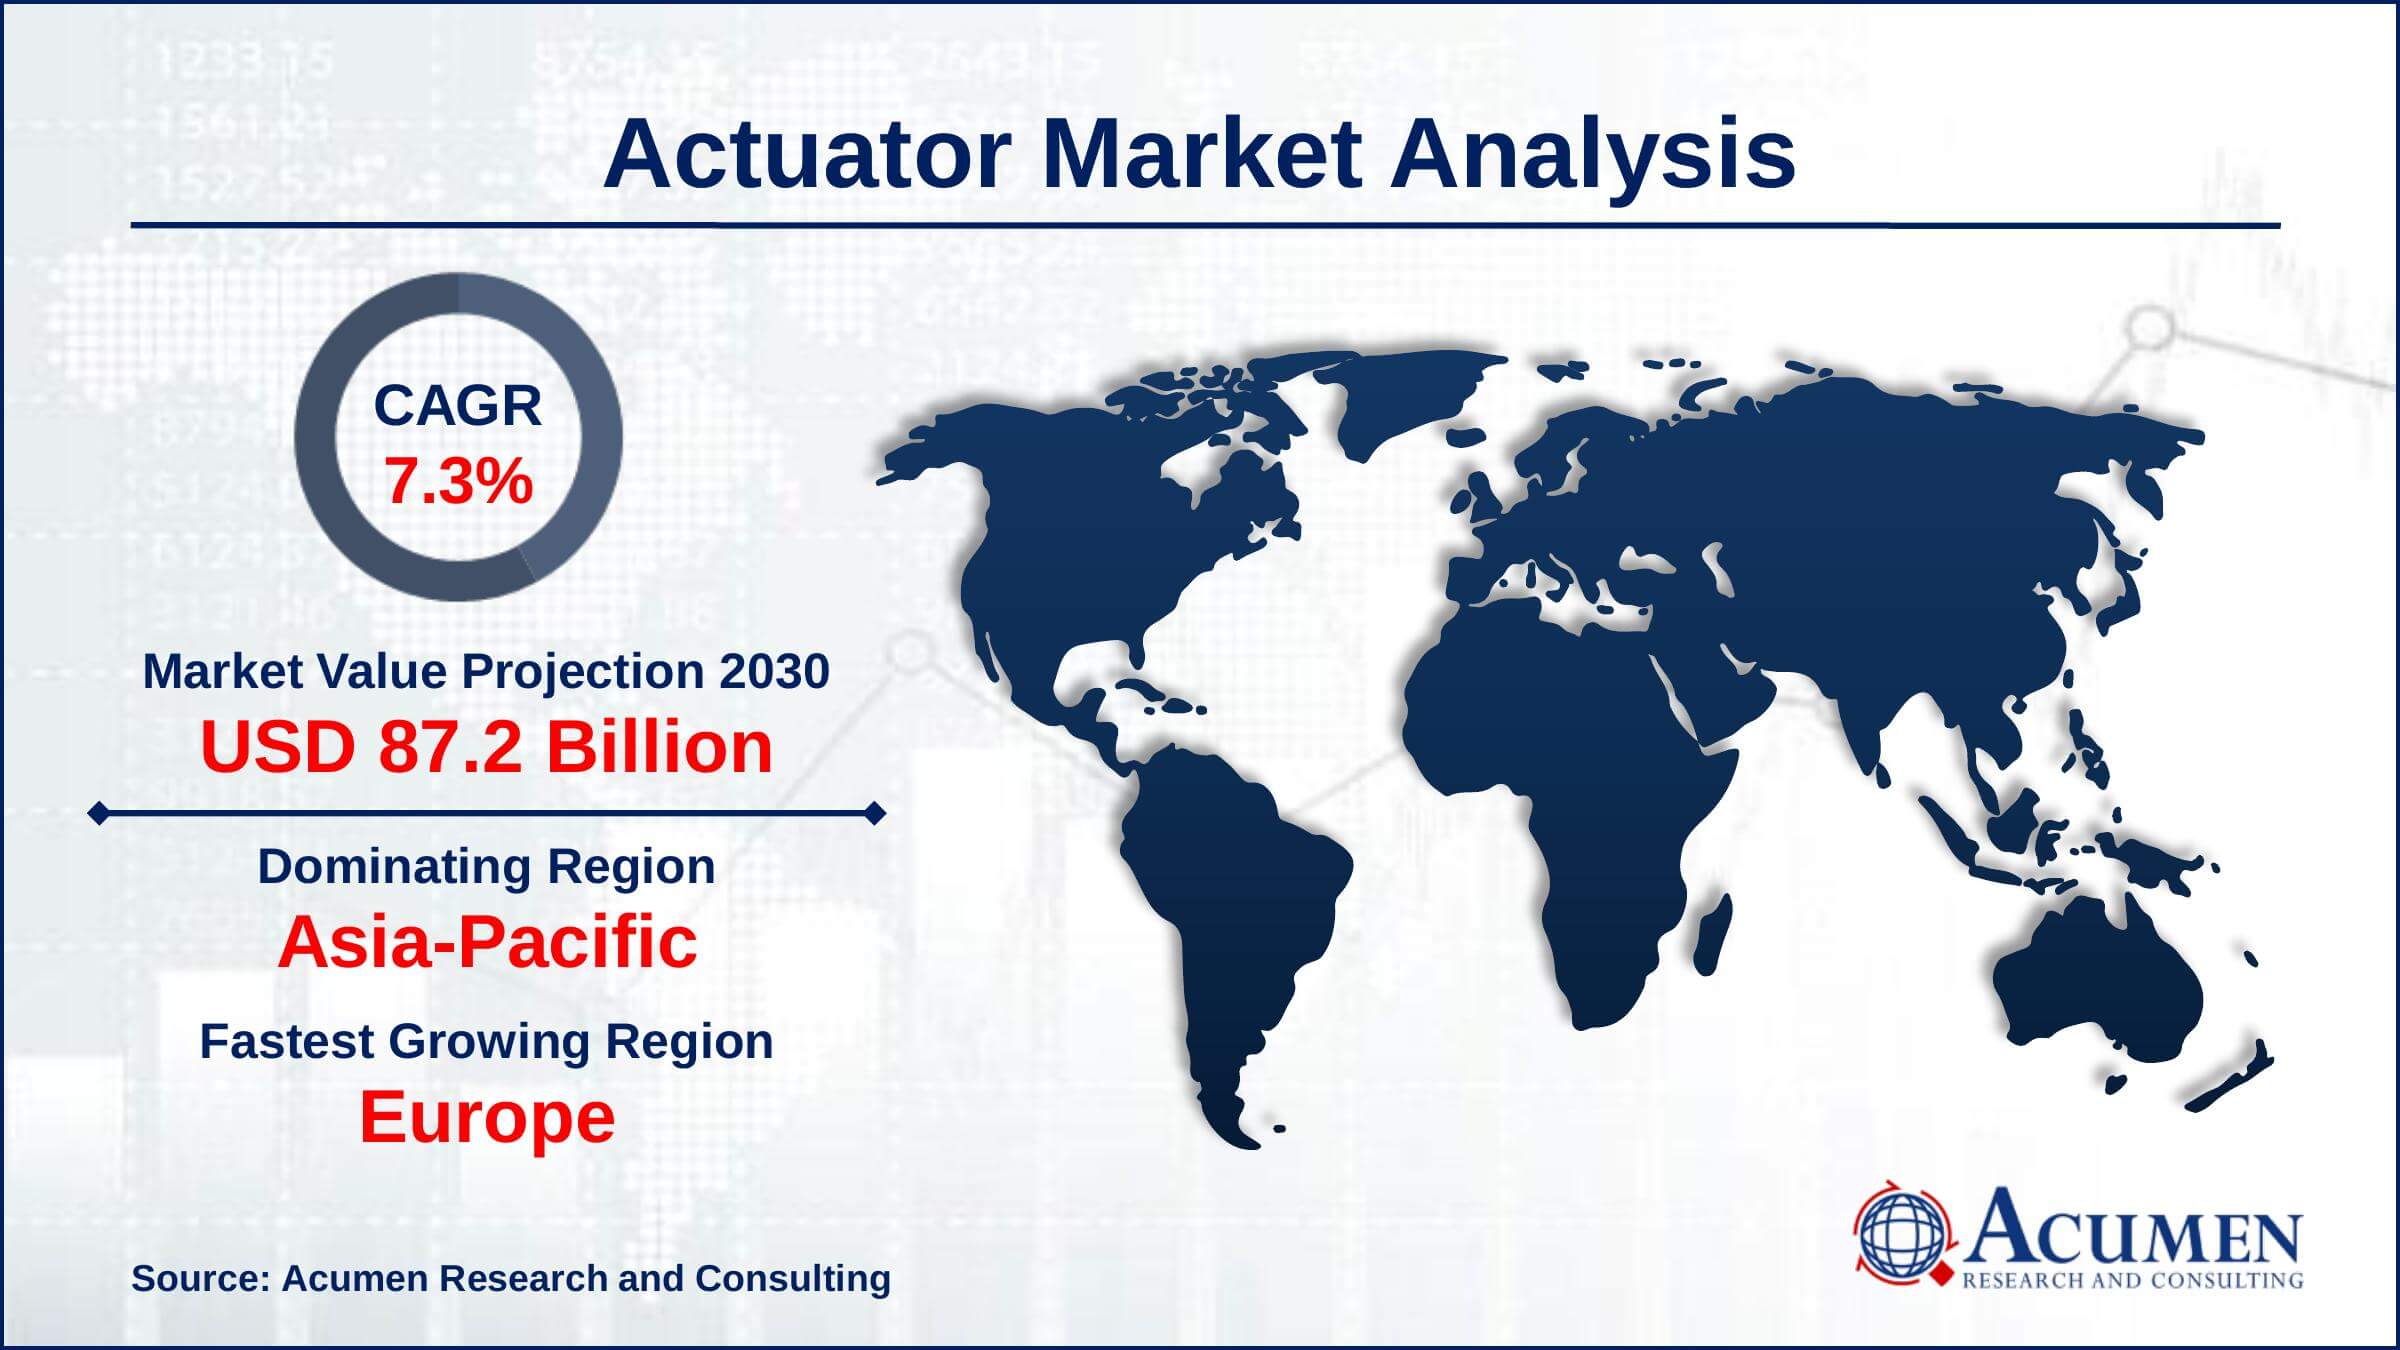 Asia-Pacific region led with more than 48% of actuator market share in 2021